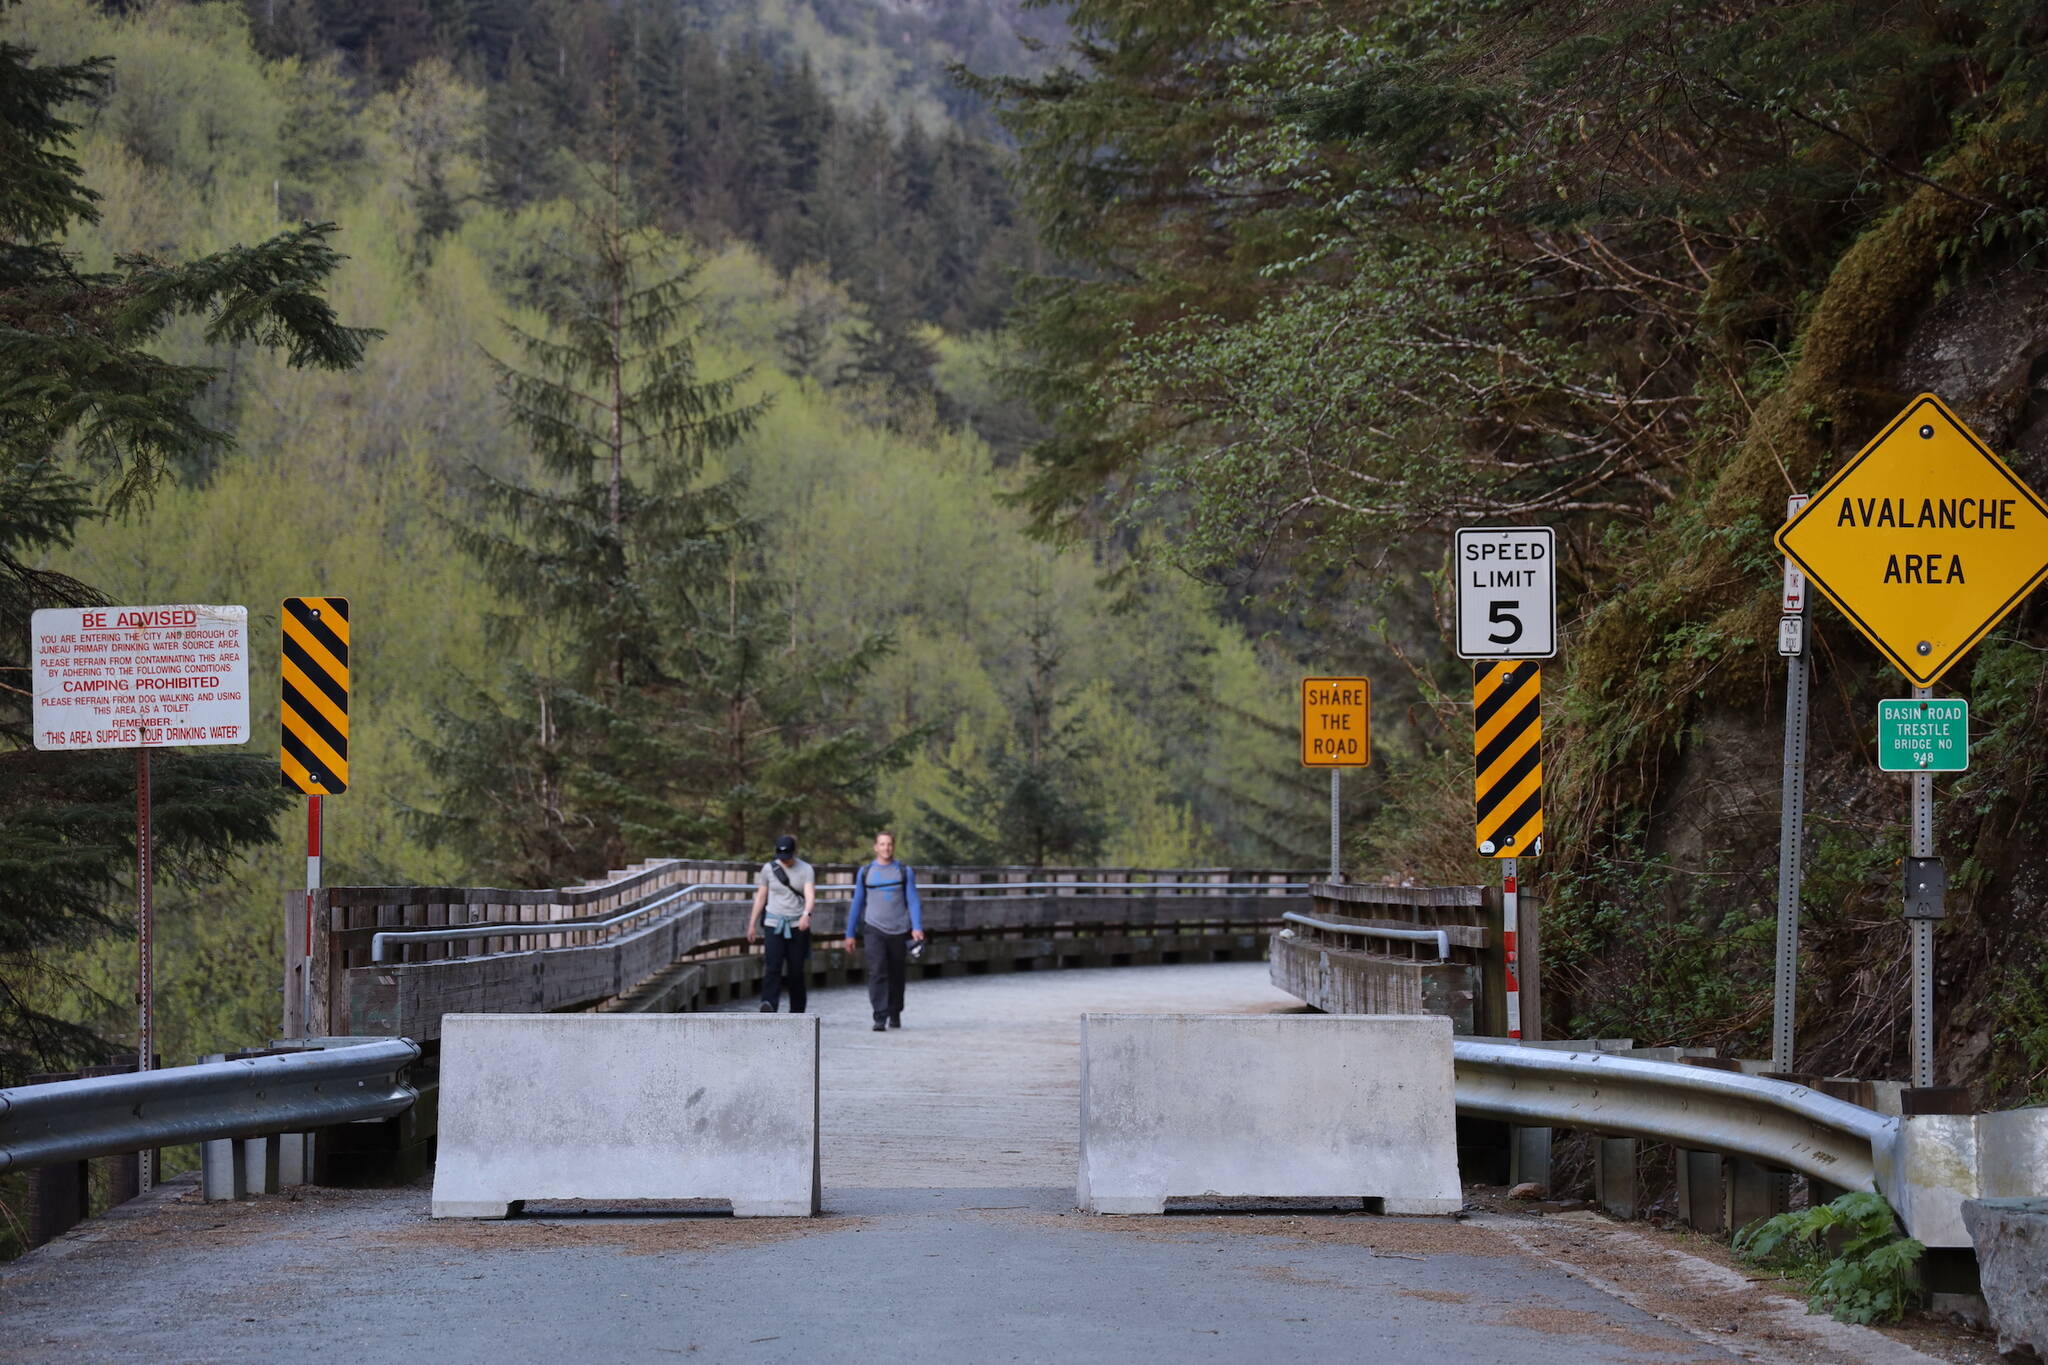 People walk along the Basin Road Trestle Tuesday evening as concrete barricades block off its entrance. The trestle is set to close to pedestrian traffic spanning from May 26 to June 11 between 7 a.m. and 7 p.m. while a contracted construction company repairs damages the trestle suffered in January from a rockslide. (Clarise Larson / Juneau Empire)